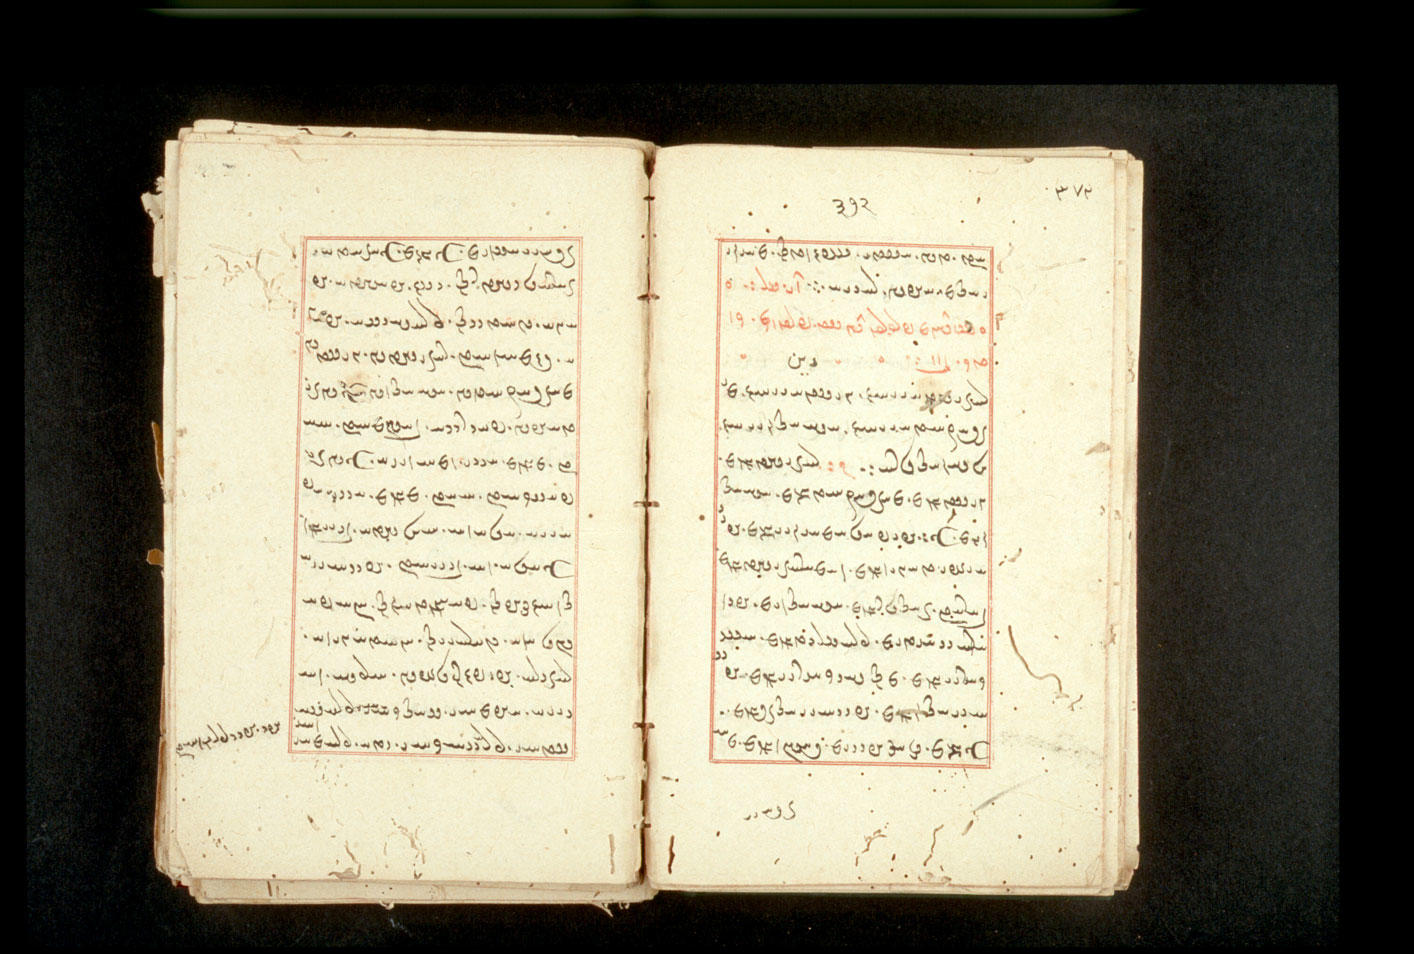 Folios 372v (right) and 373r (left)